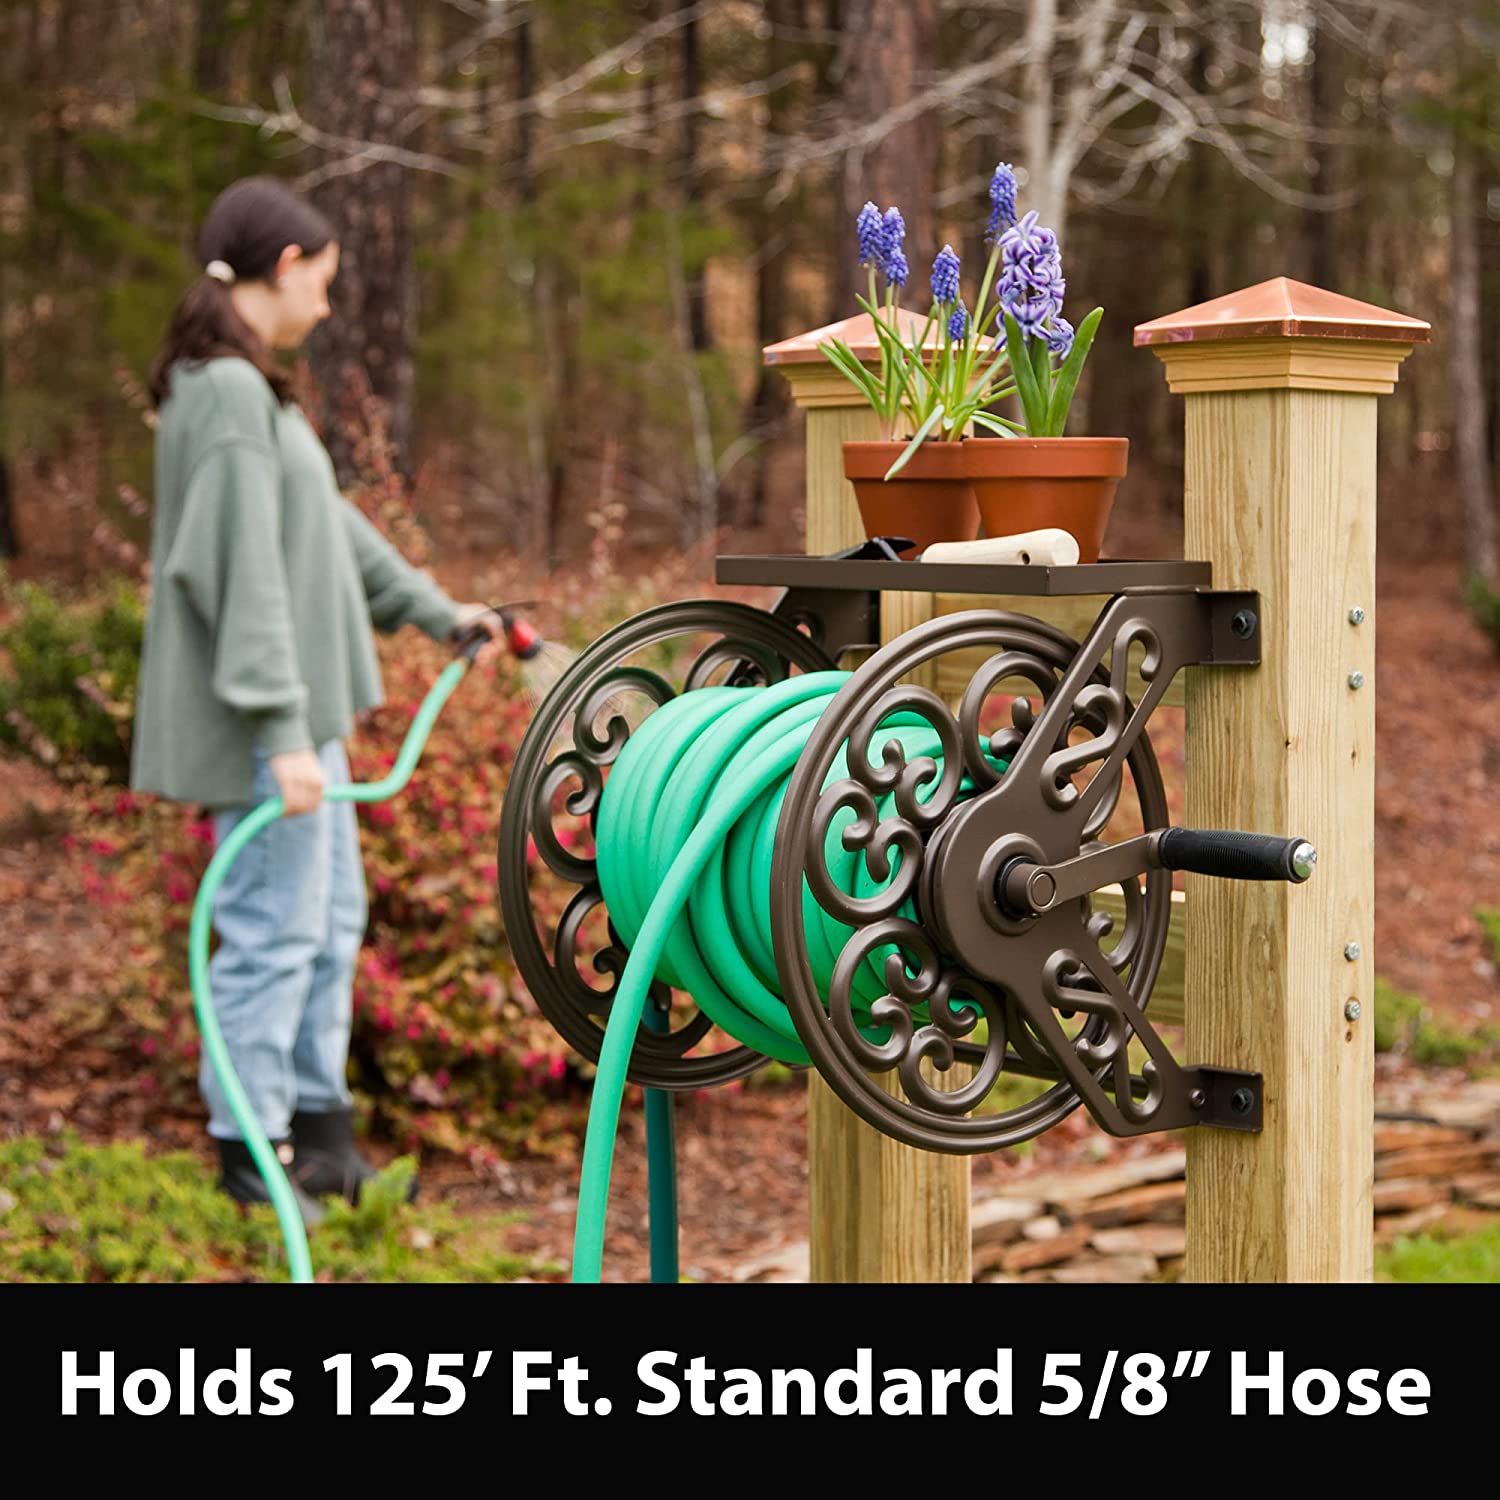 Liberty Garden Products 708 Steel Decorative Wall Mount Garden Hose Reel,  Holds 125-Feet of 5/8-Inch Hose - Bronze